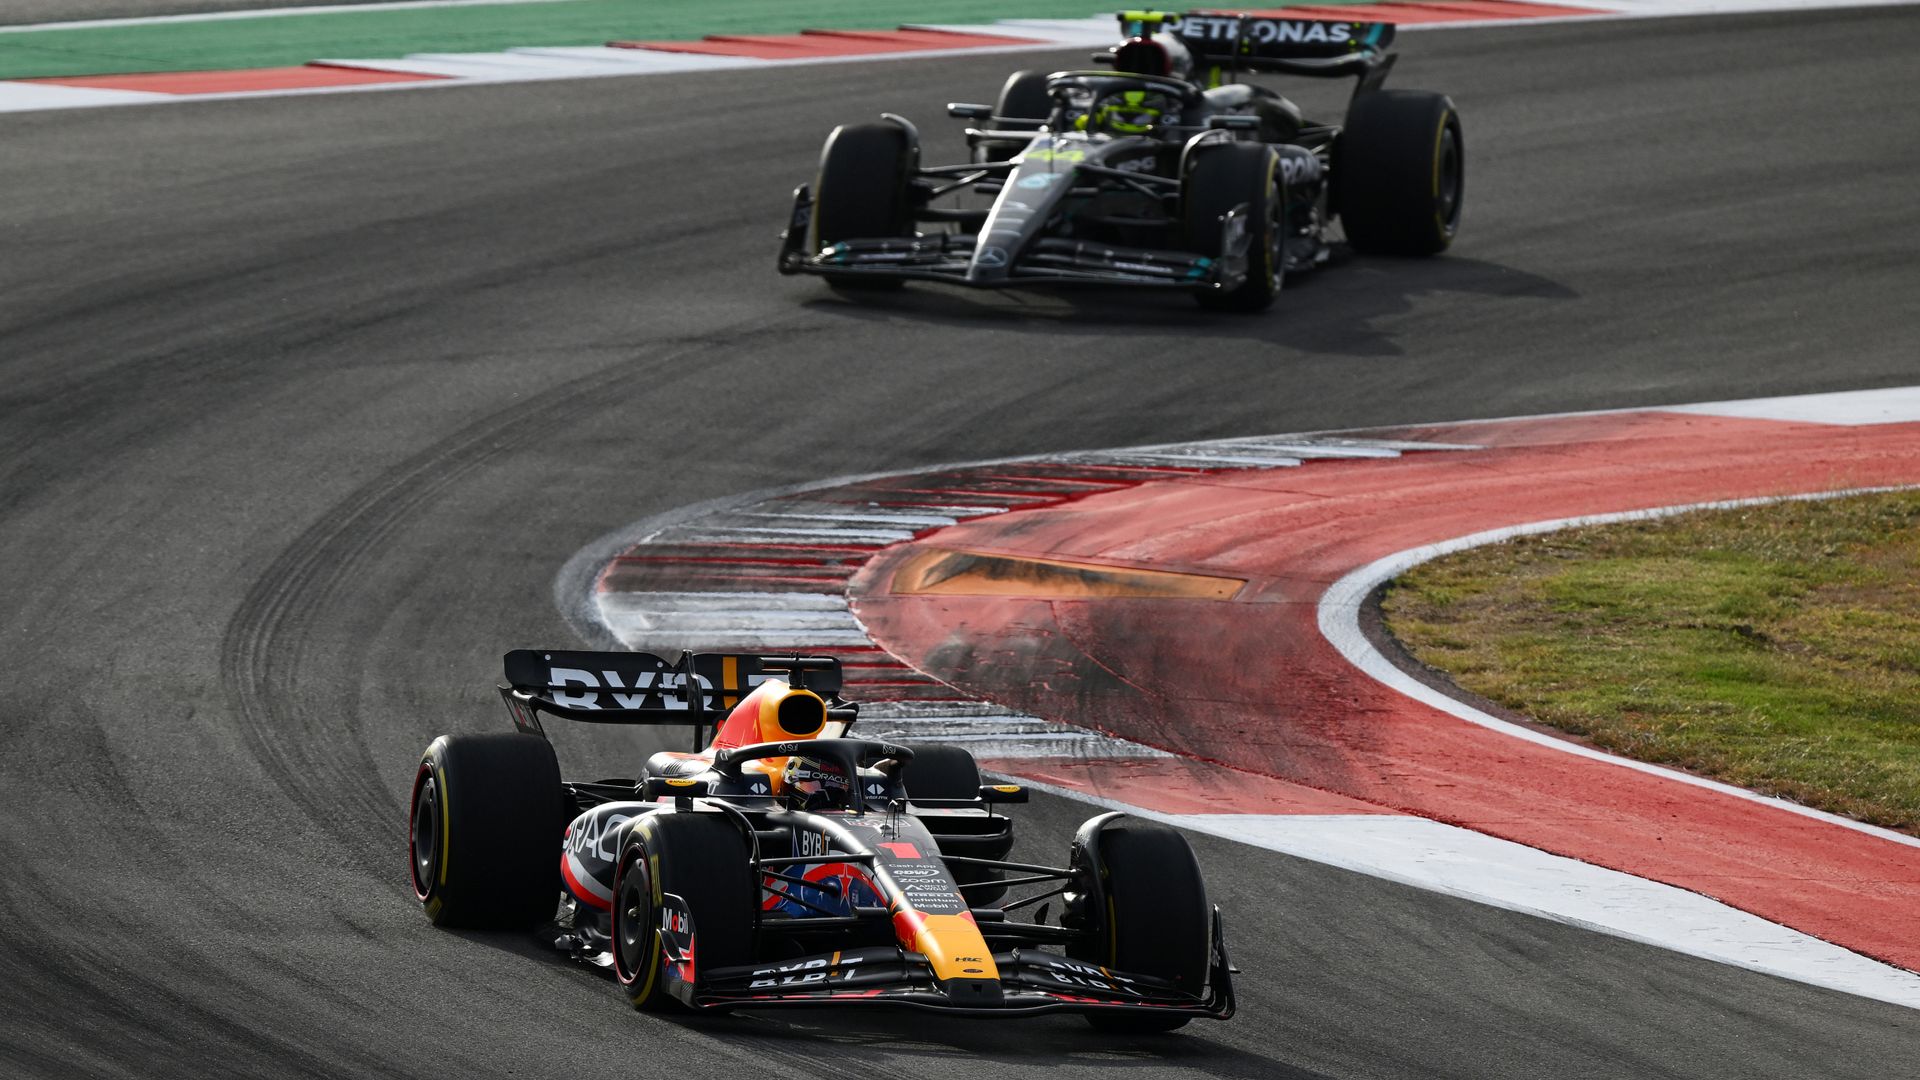 US GP Sprint: Verstappen eases to victory ahead of Hamilton LIVE!